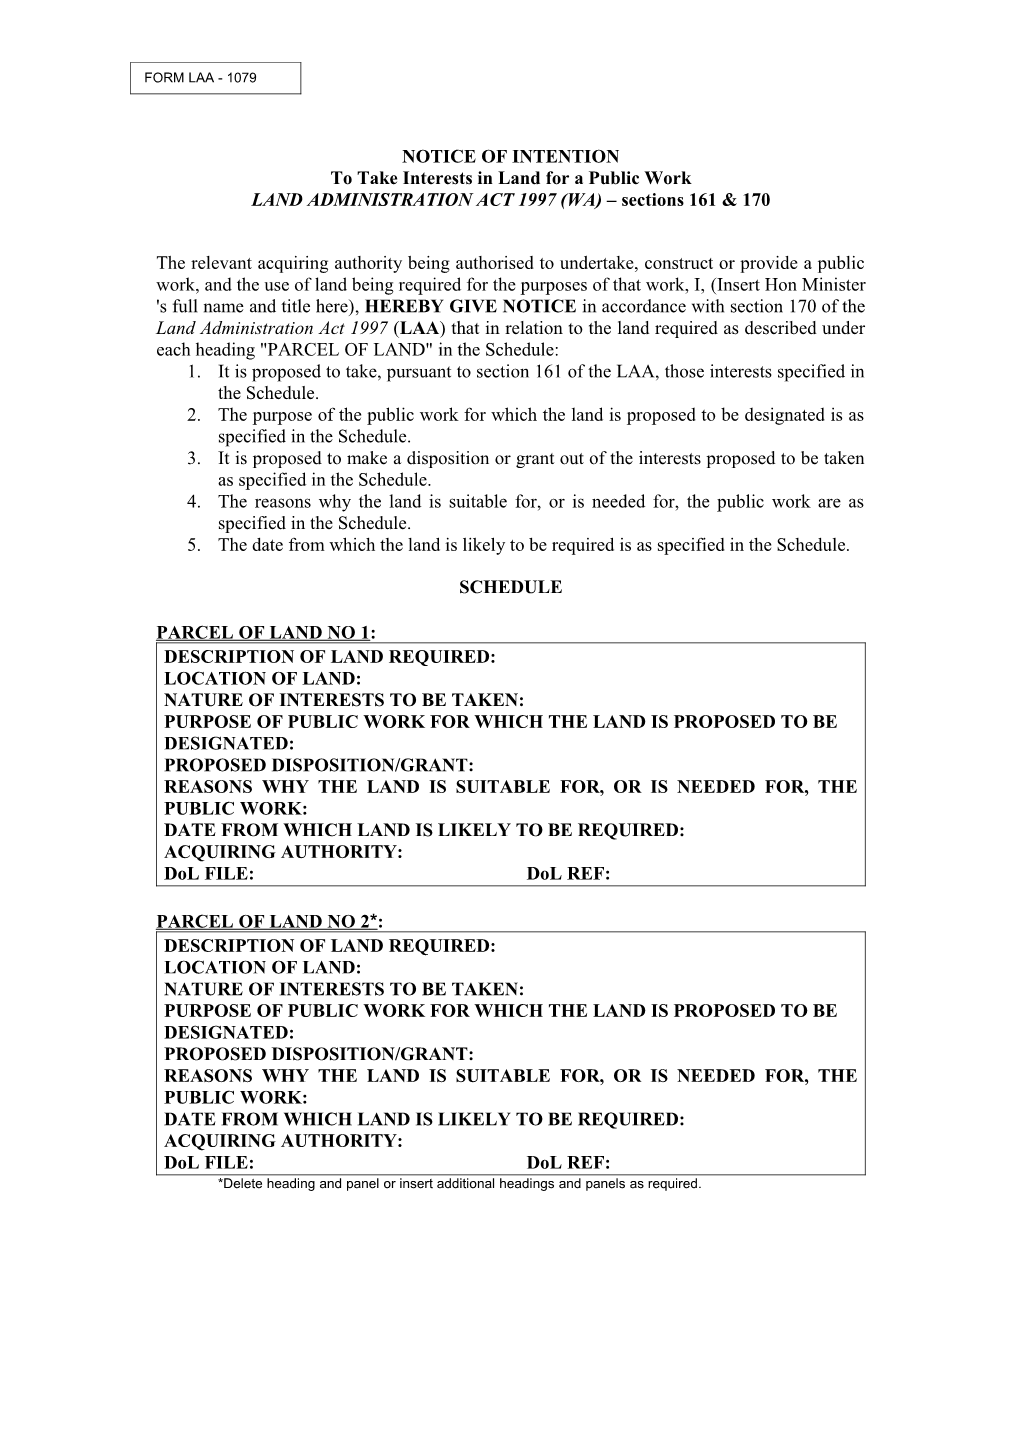 LAA Form 1079 Notice of Intention to Take Interests in Land for a Public Work (Sections